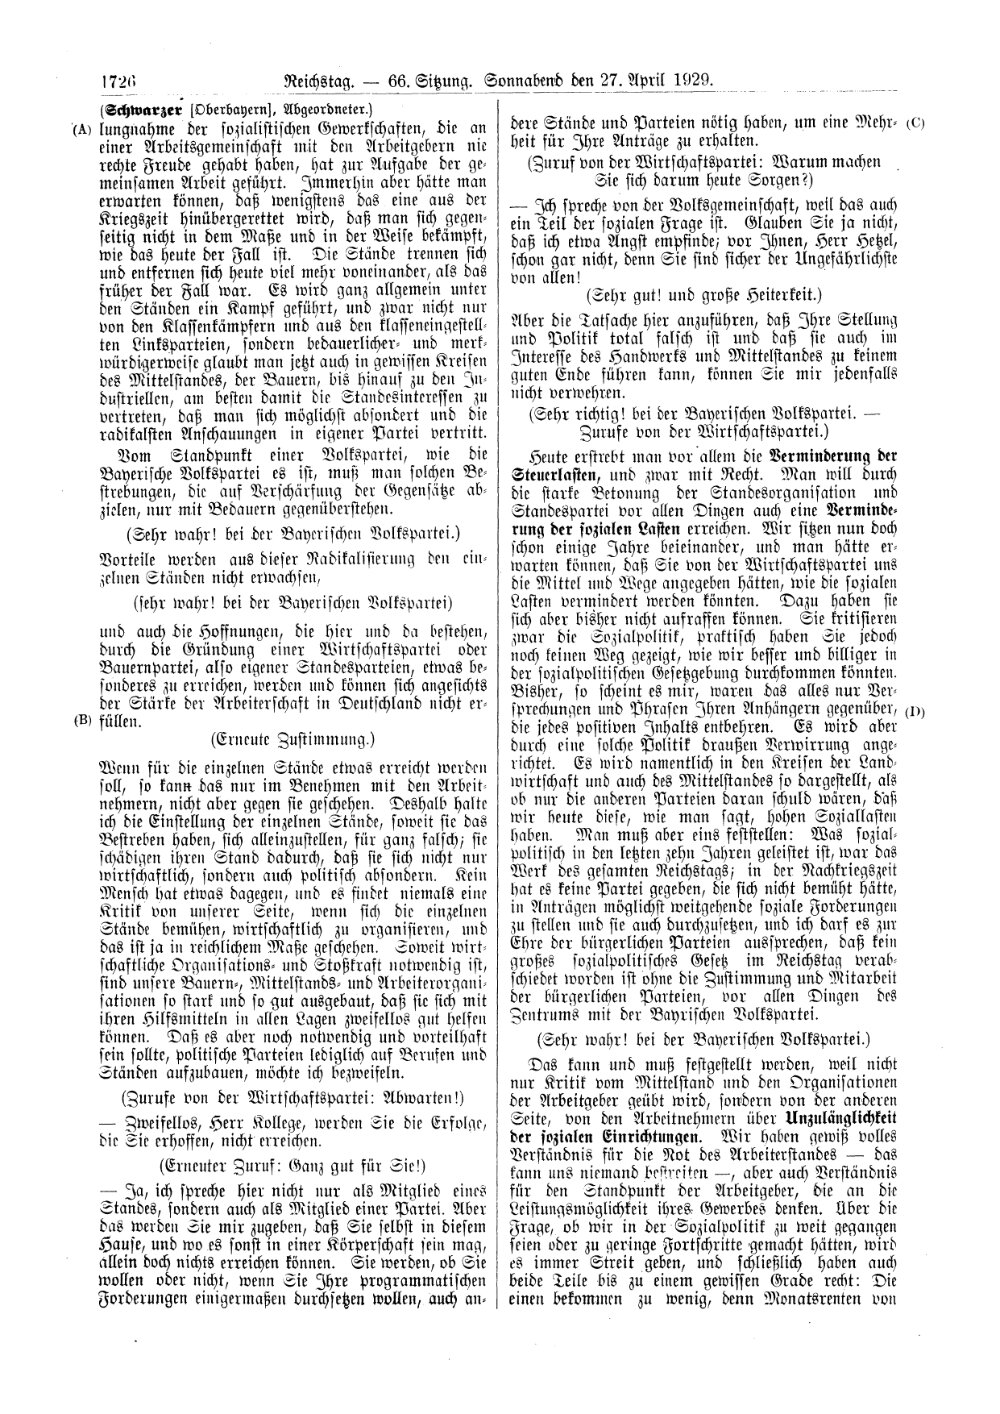 Scan of page 1726